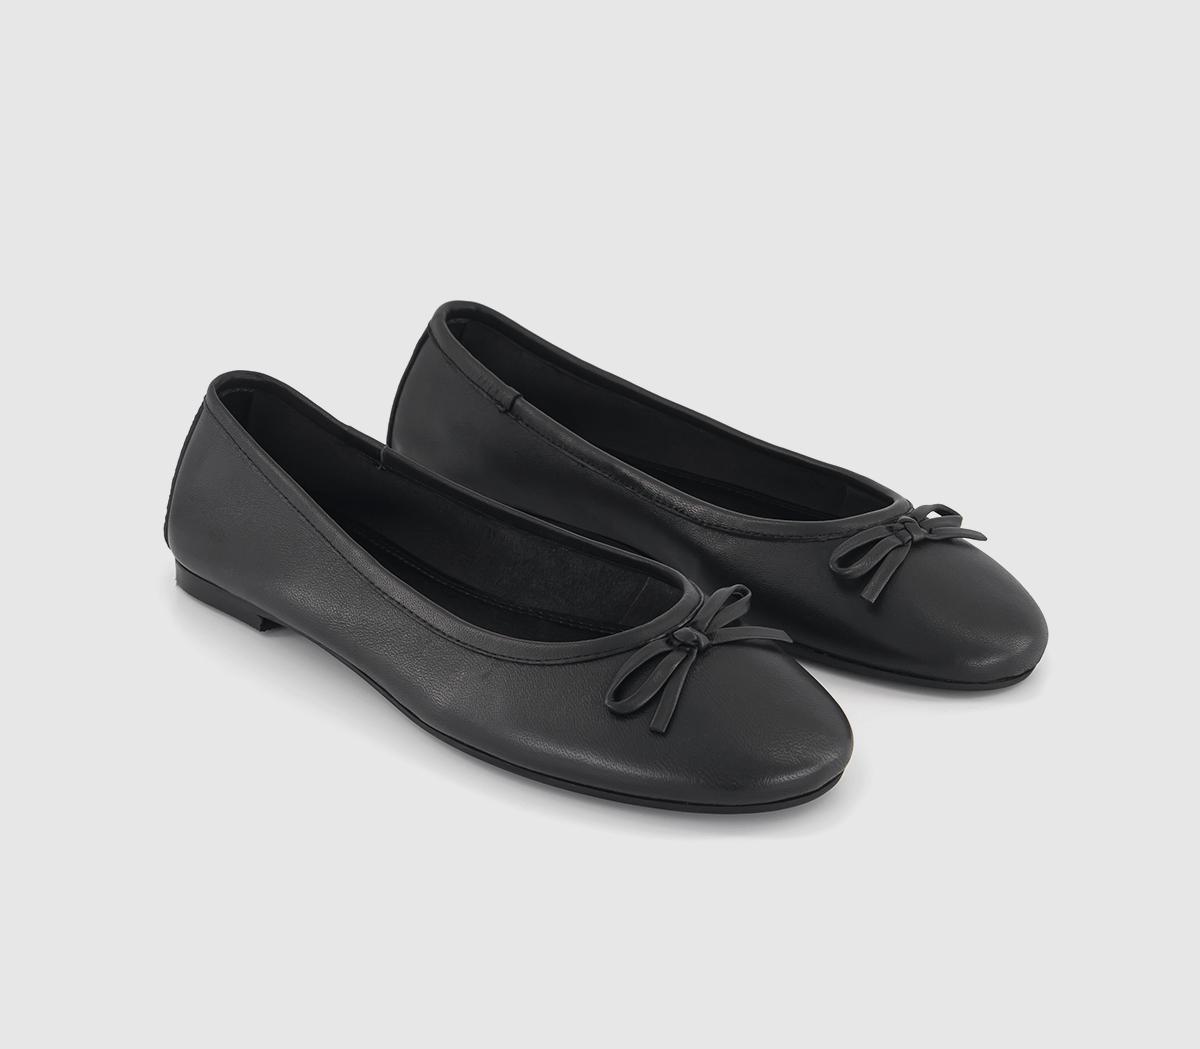 OFFICE Womens Frazzle Leather Ballerina Shoes Black, 3